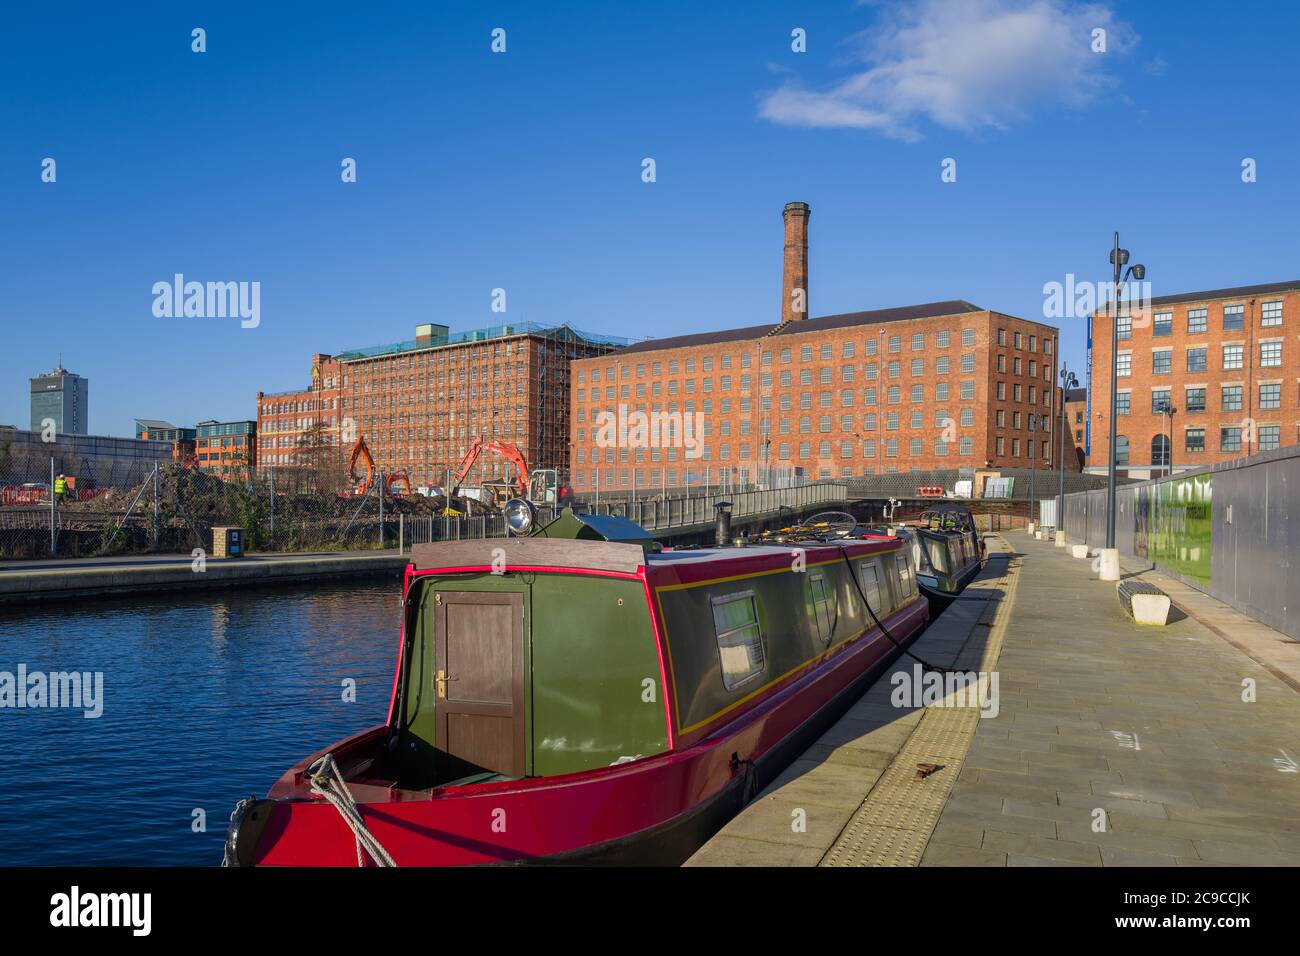 Variety of Manchester buildings - City Tower, Royal Mills, Murrays' Mills. Taken from towpath in New Islington Marina, Ancoats, Manchester. Stock Photo